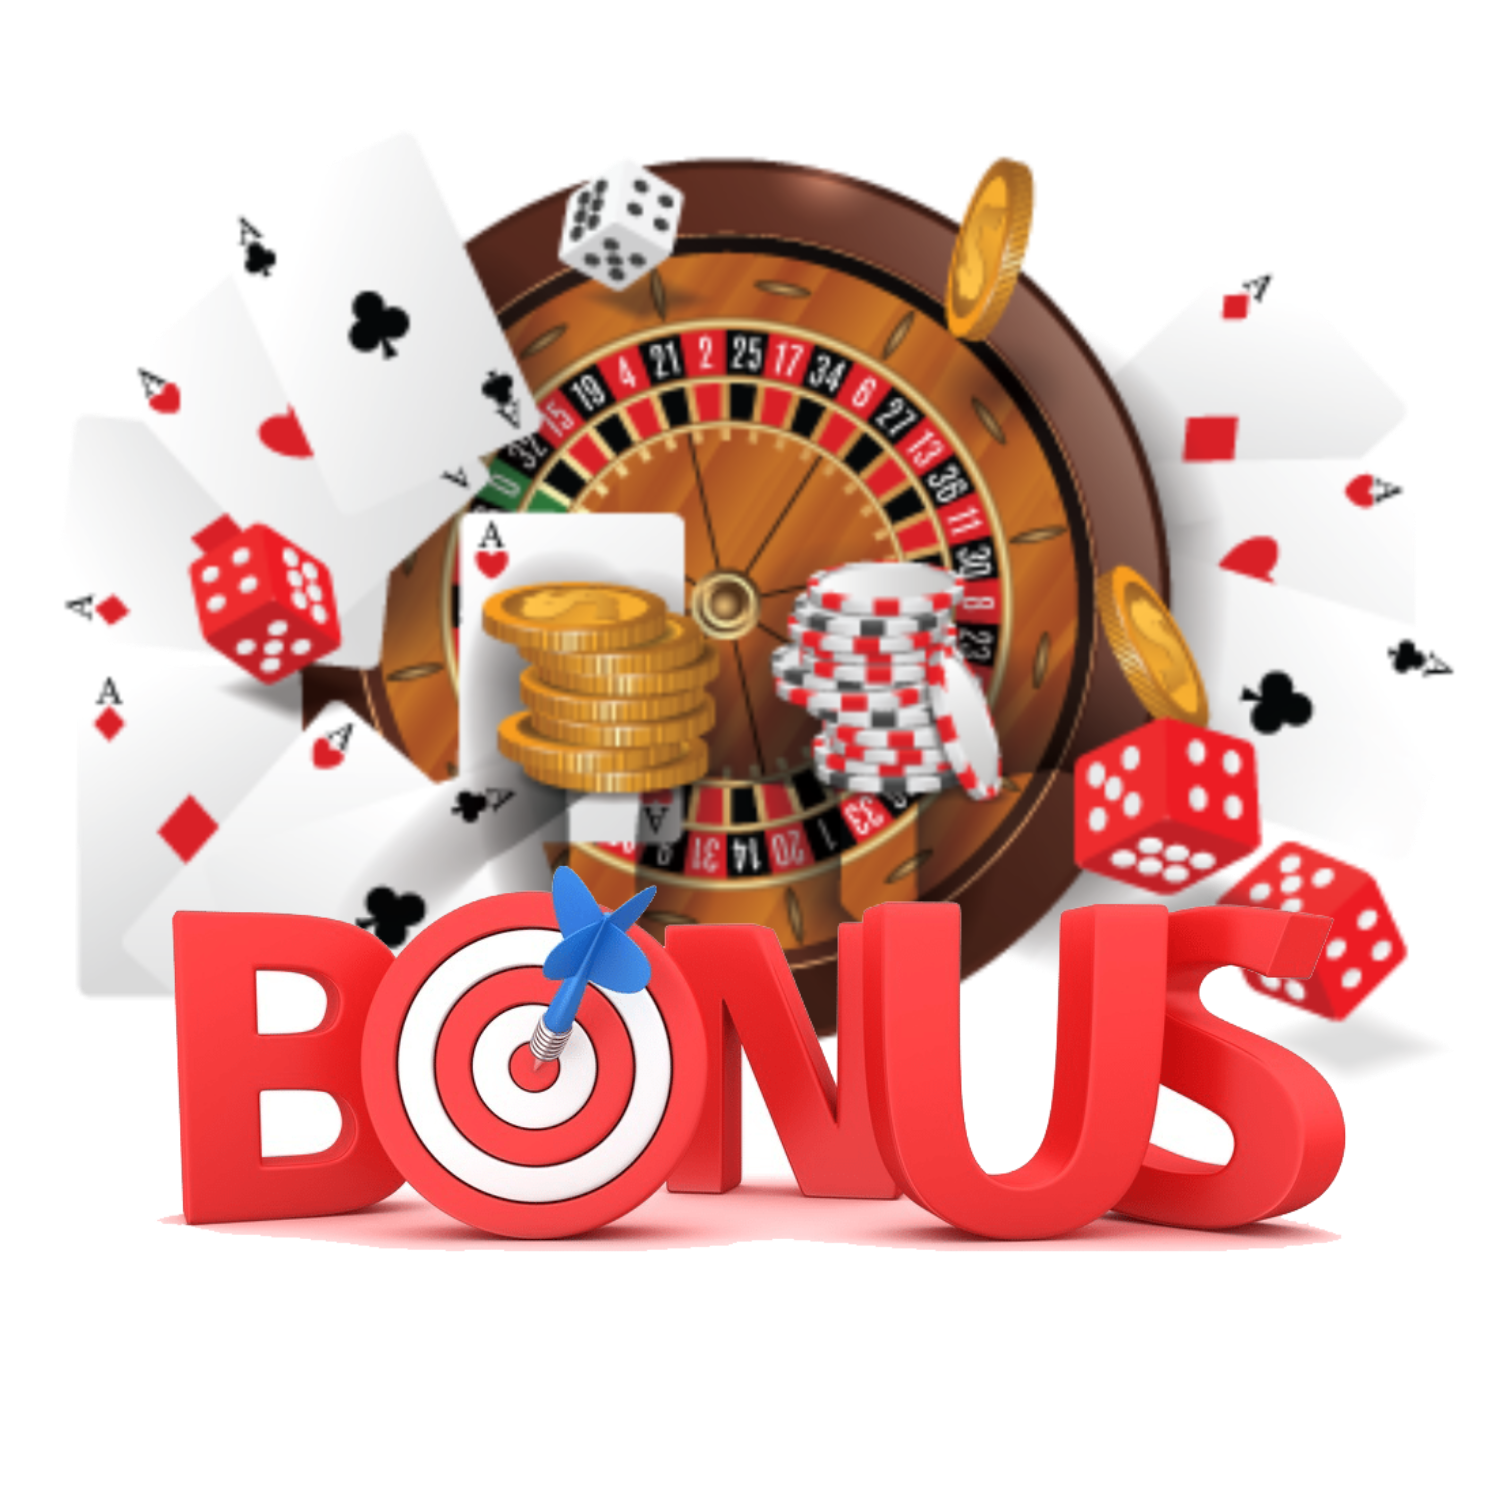 You should consoder all the bonus conditions to chose the best online casino.